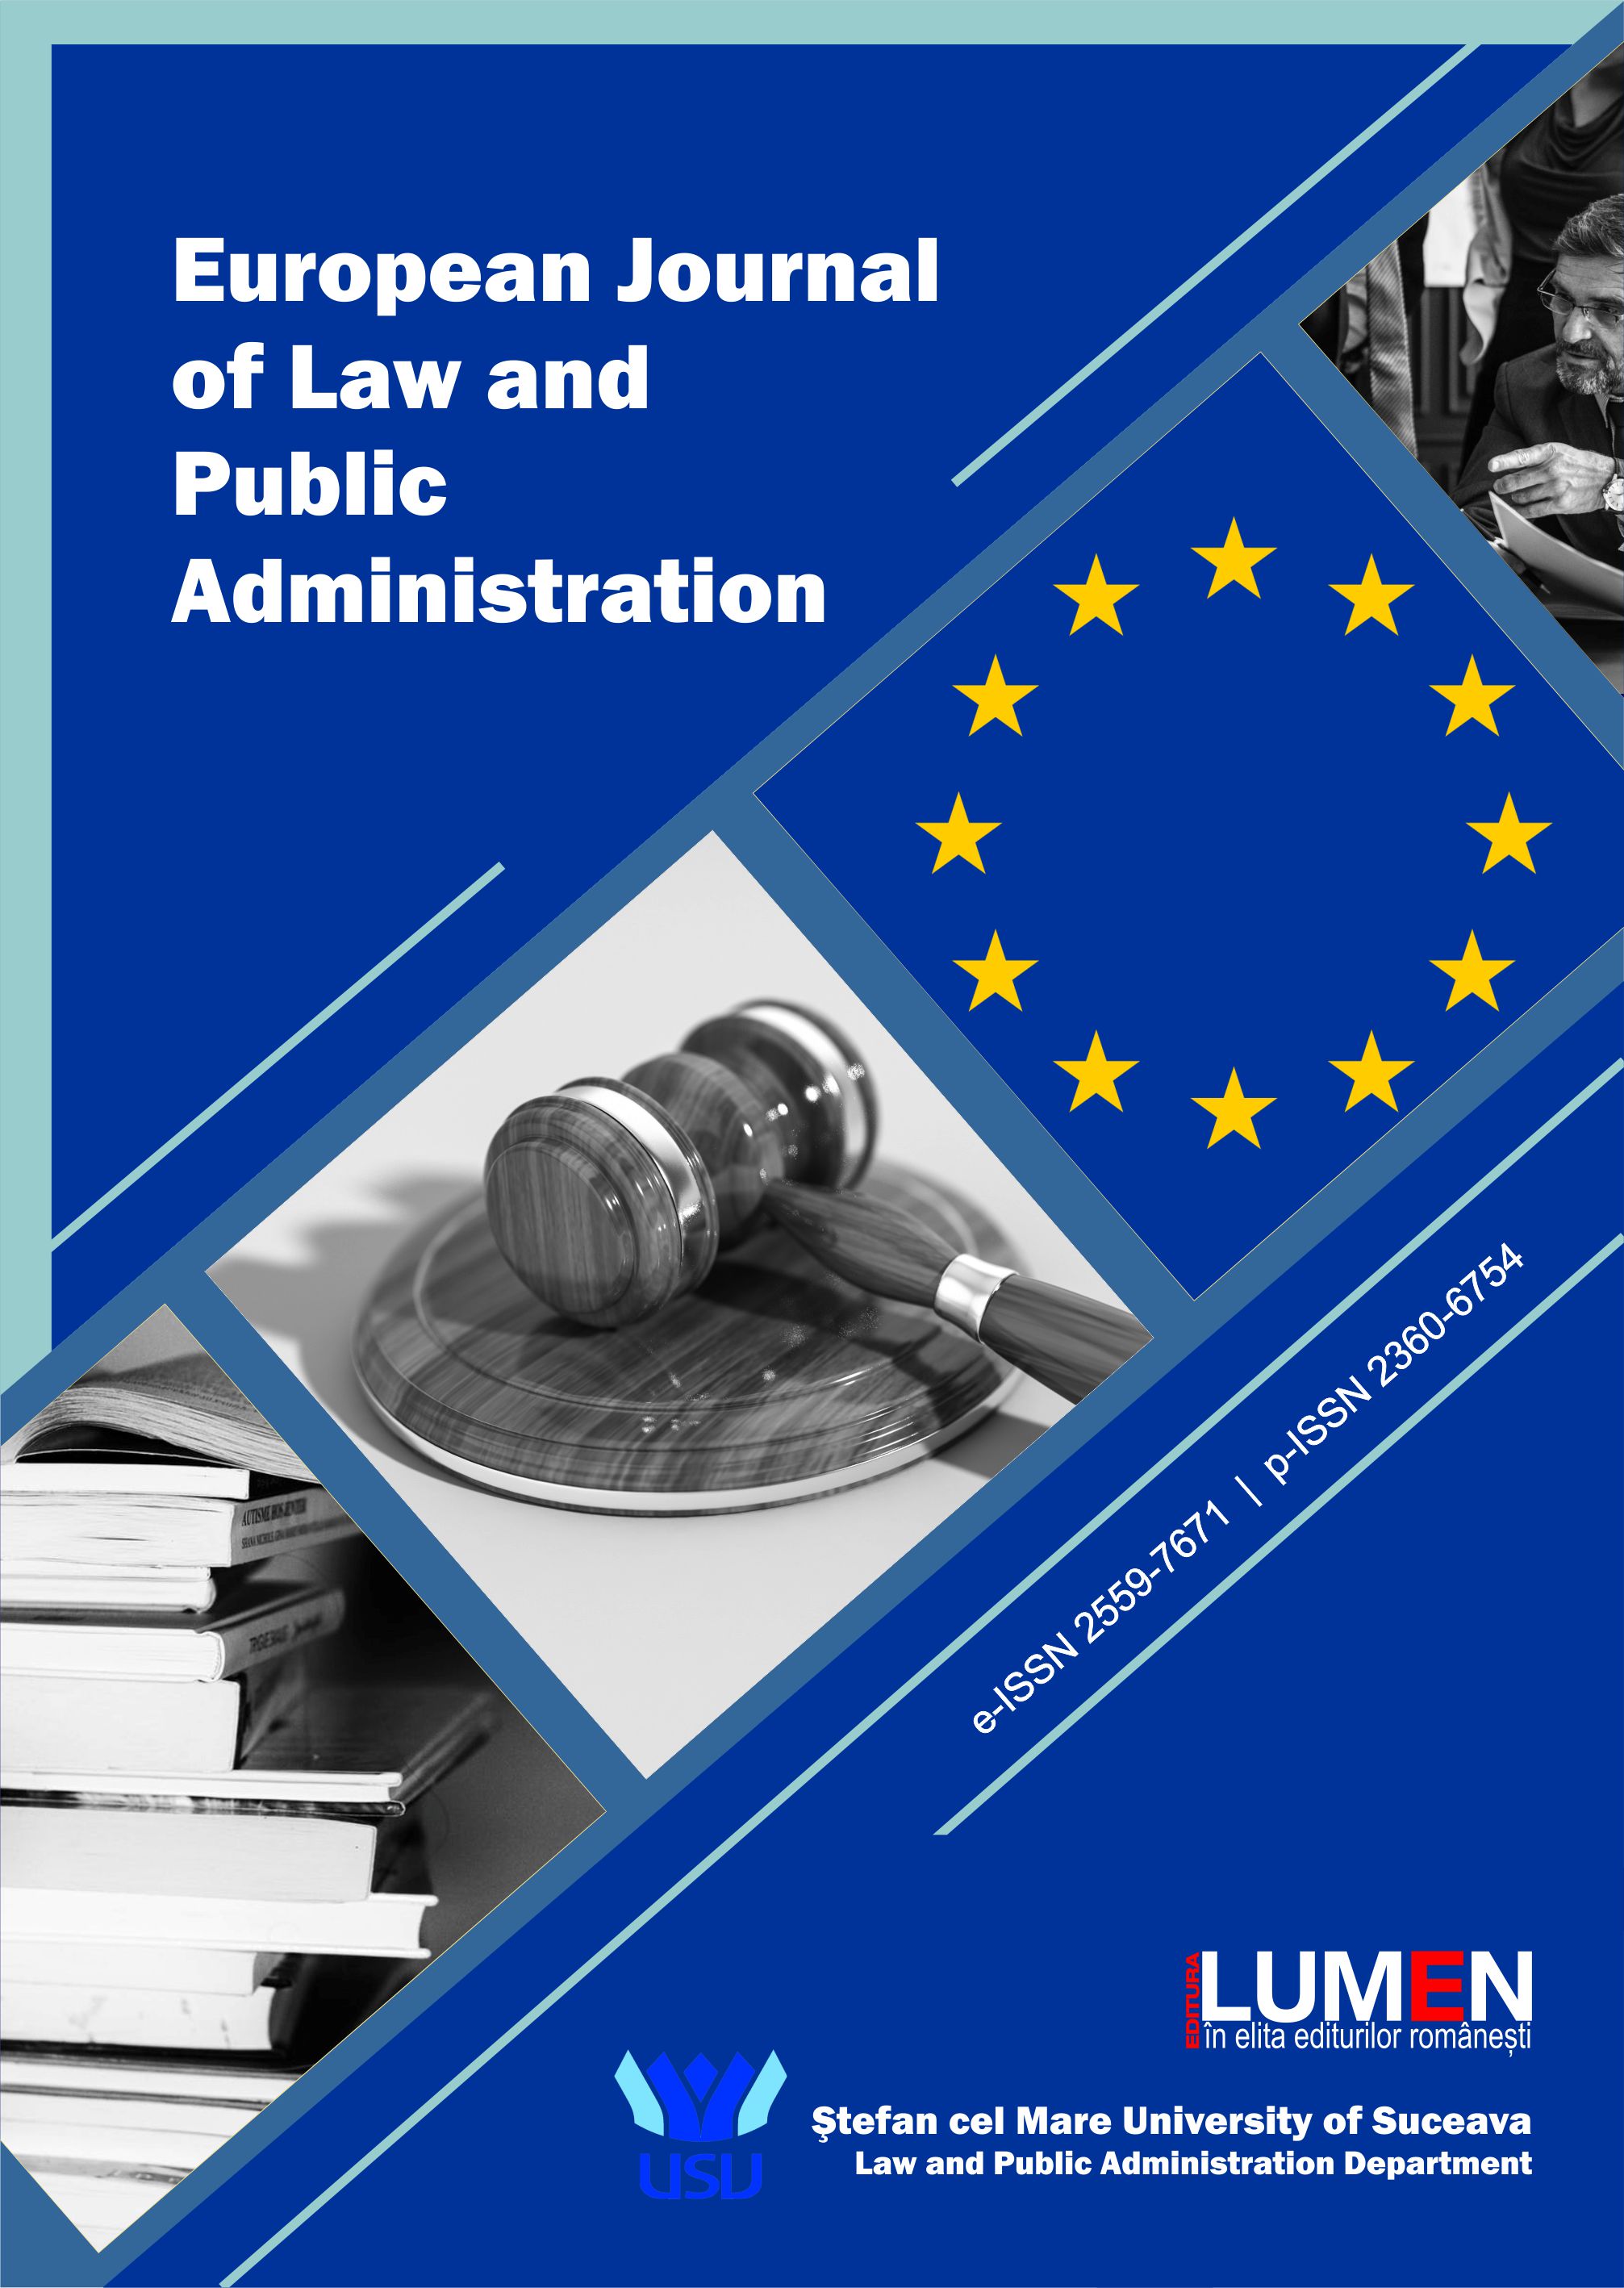 European Corporate Law – Where To? Cover Image